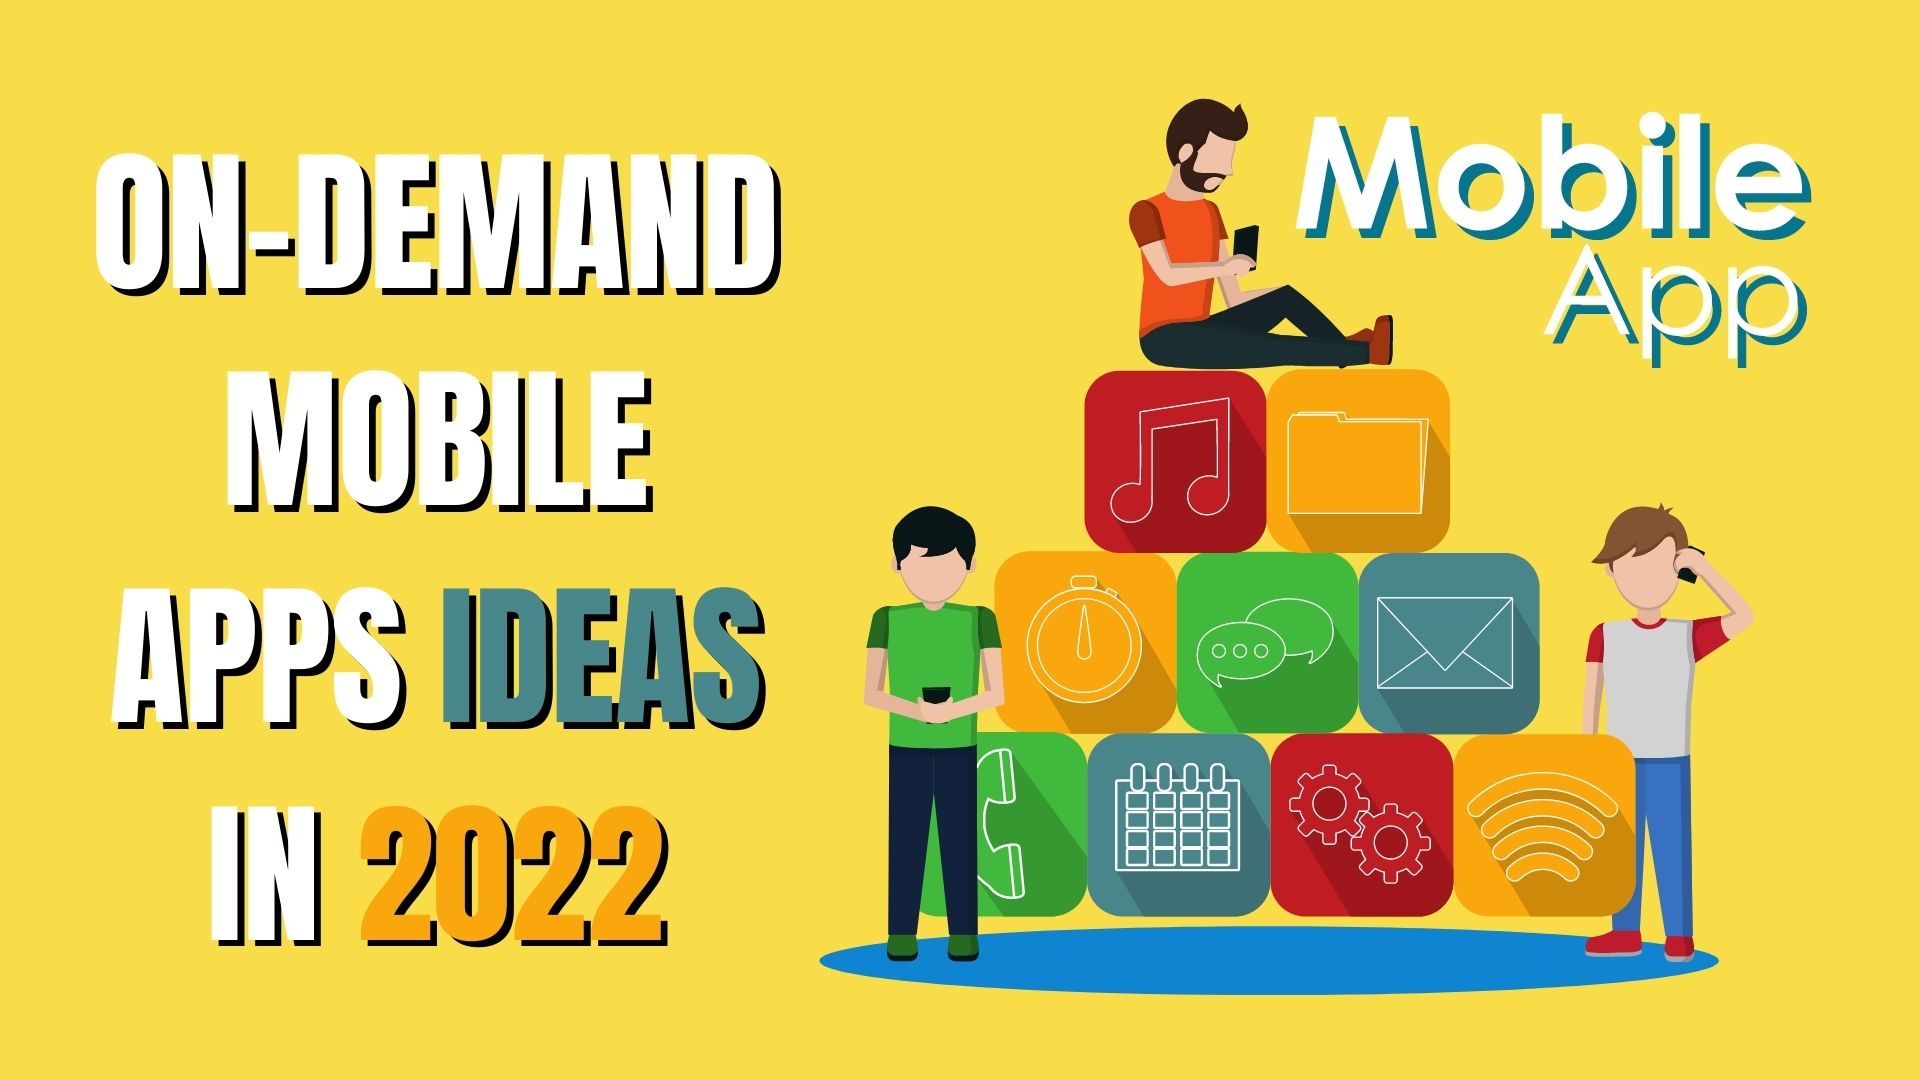 On-Demand Mobile App Ideas in 2022